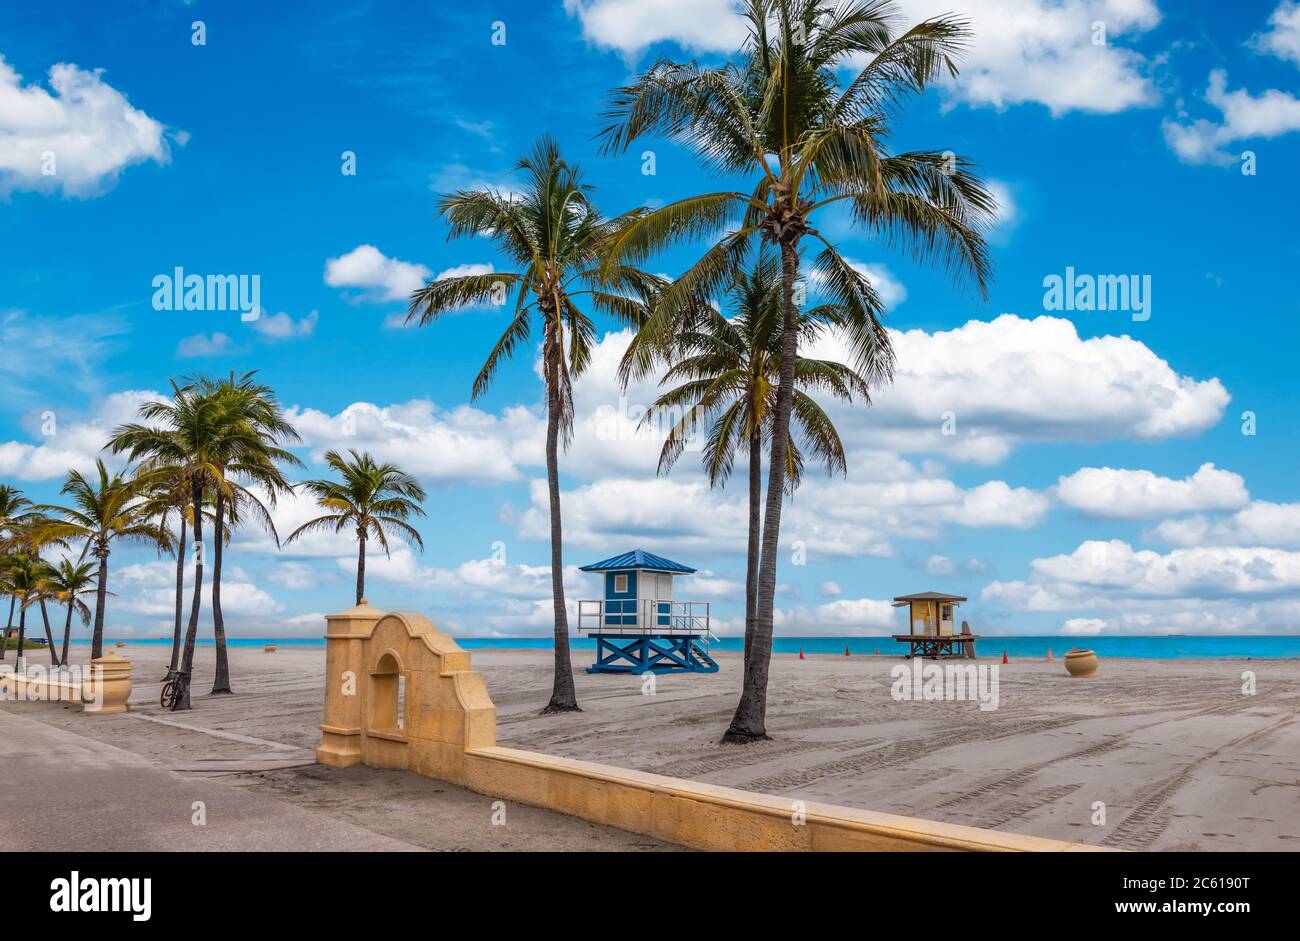 Hollywood Beach with tropical coconut palm trees and boardwalk in Florida. Stock Photo